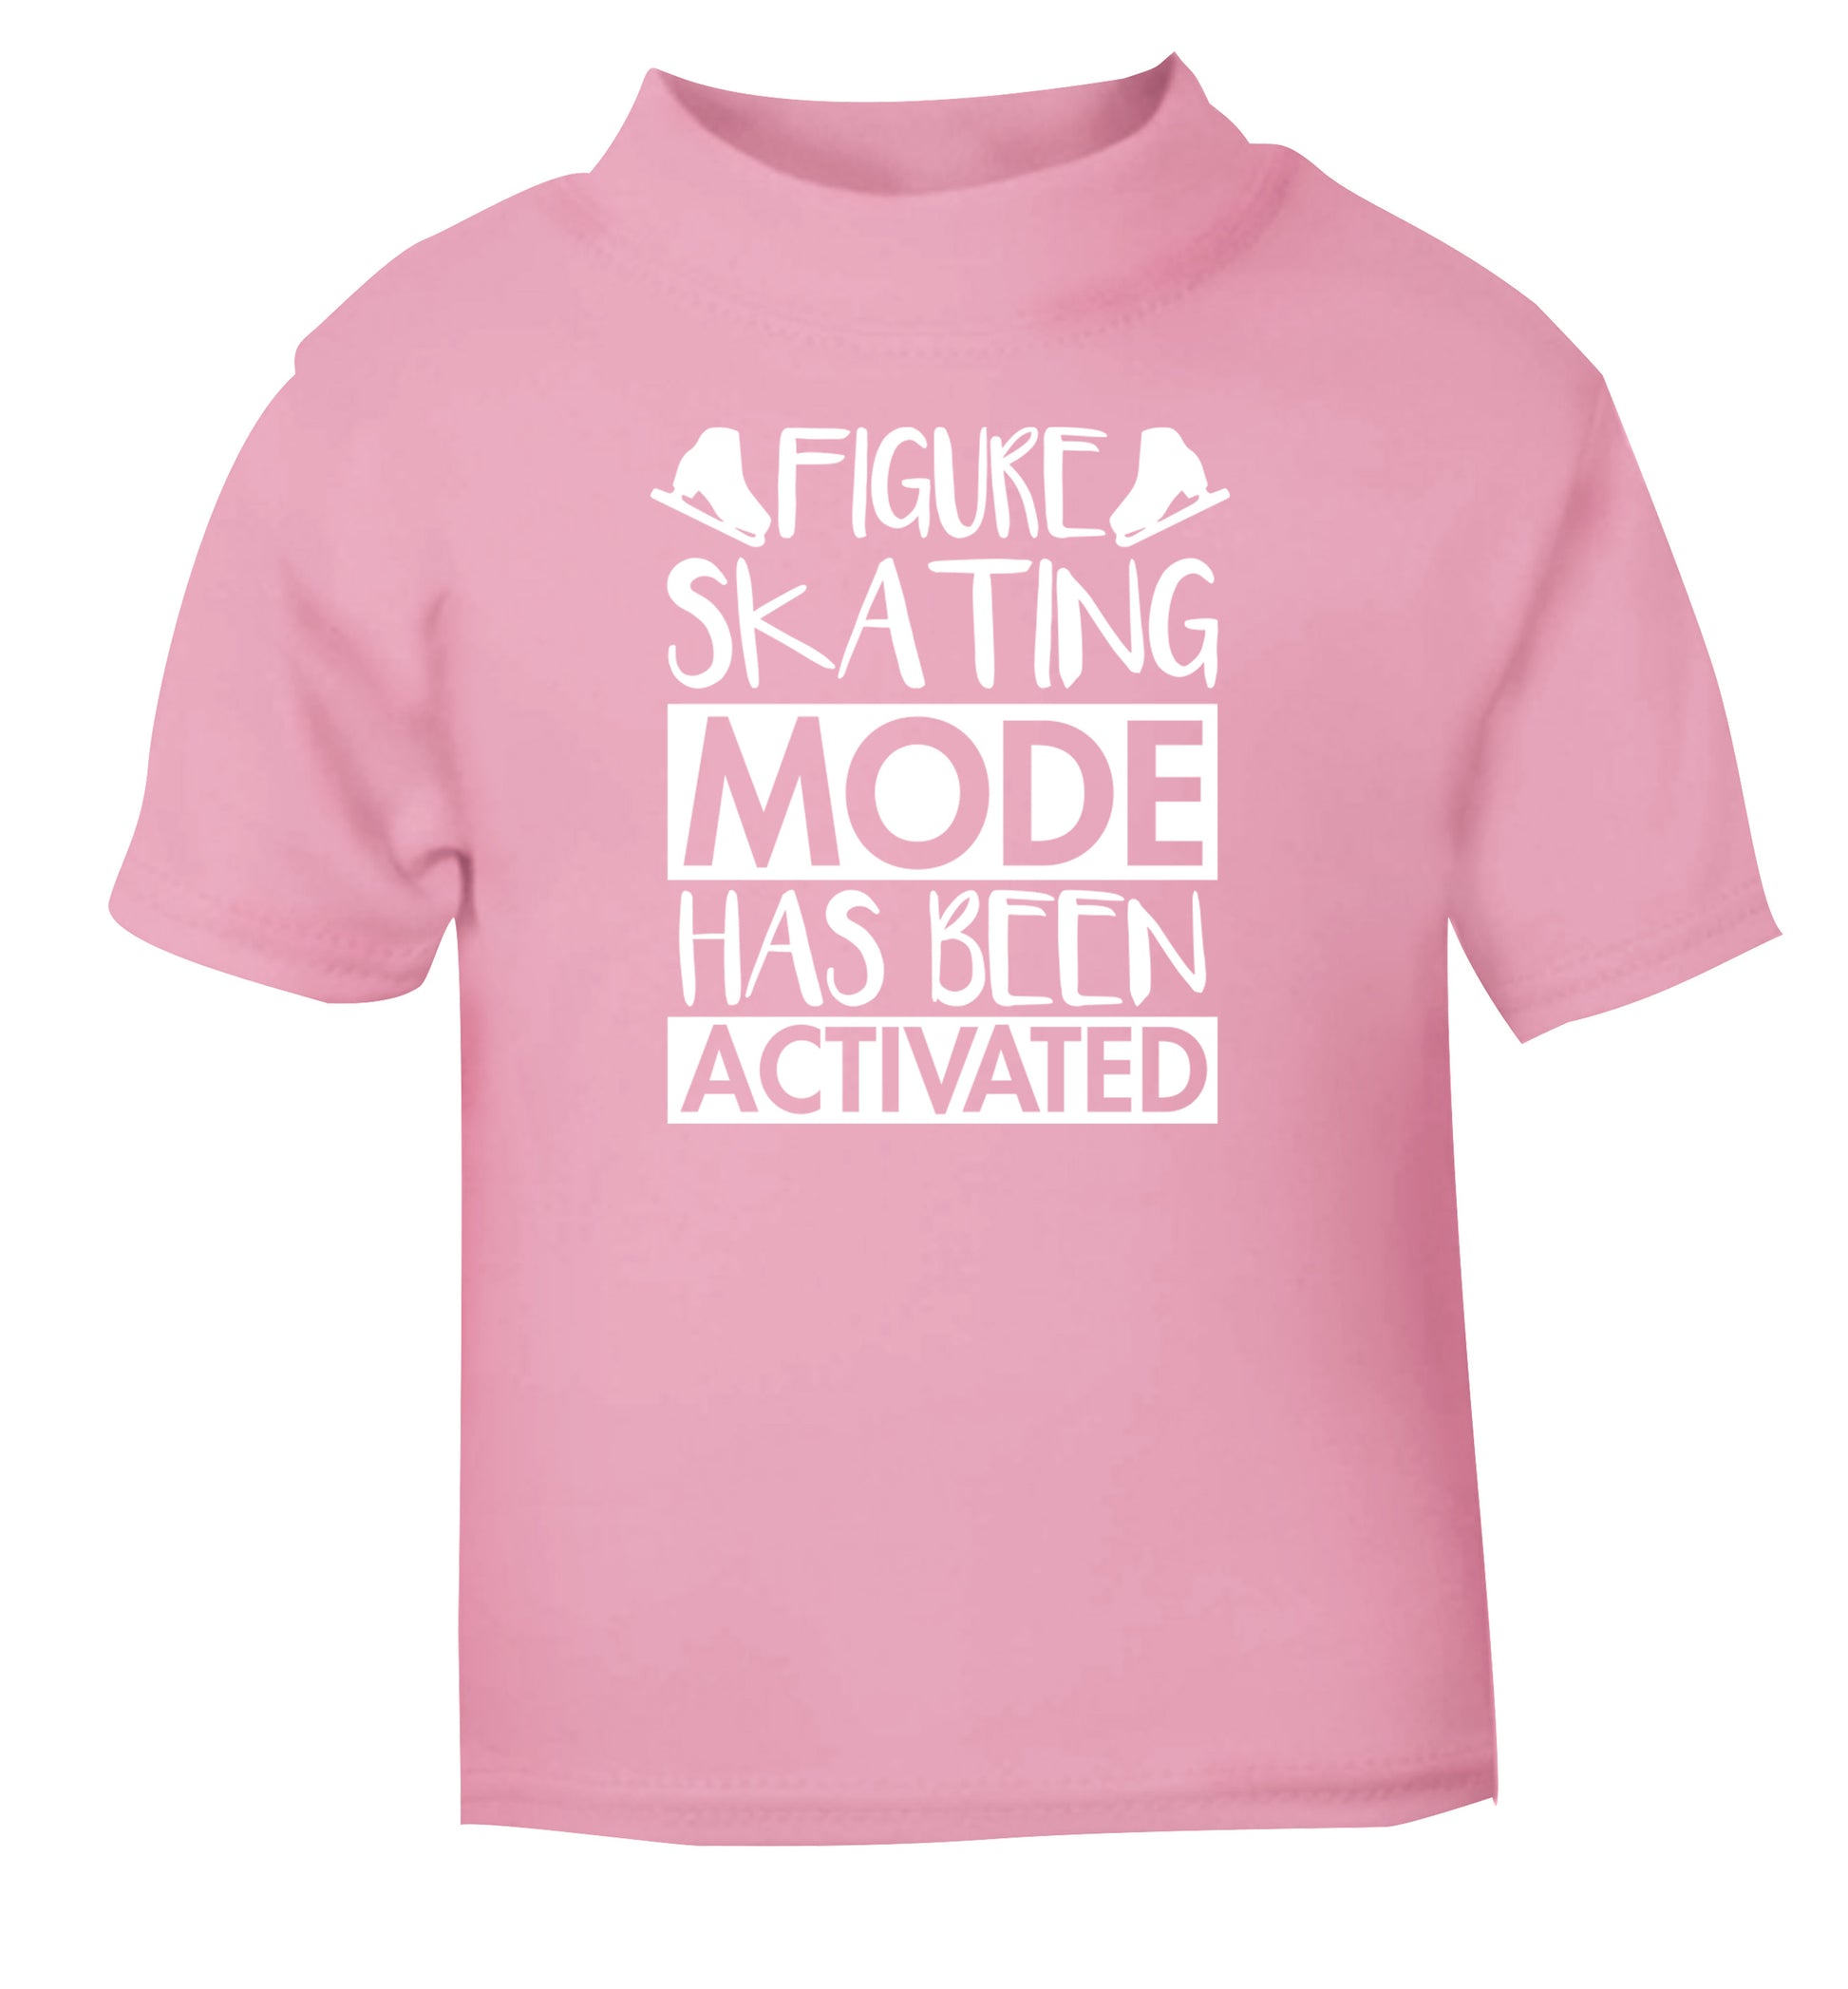 Figure skating mode activated light pink Baby Toddler Tshirt 2 Years